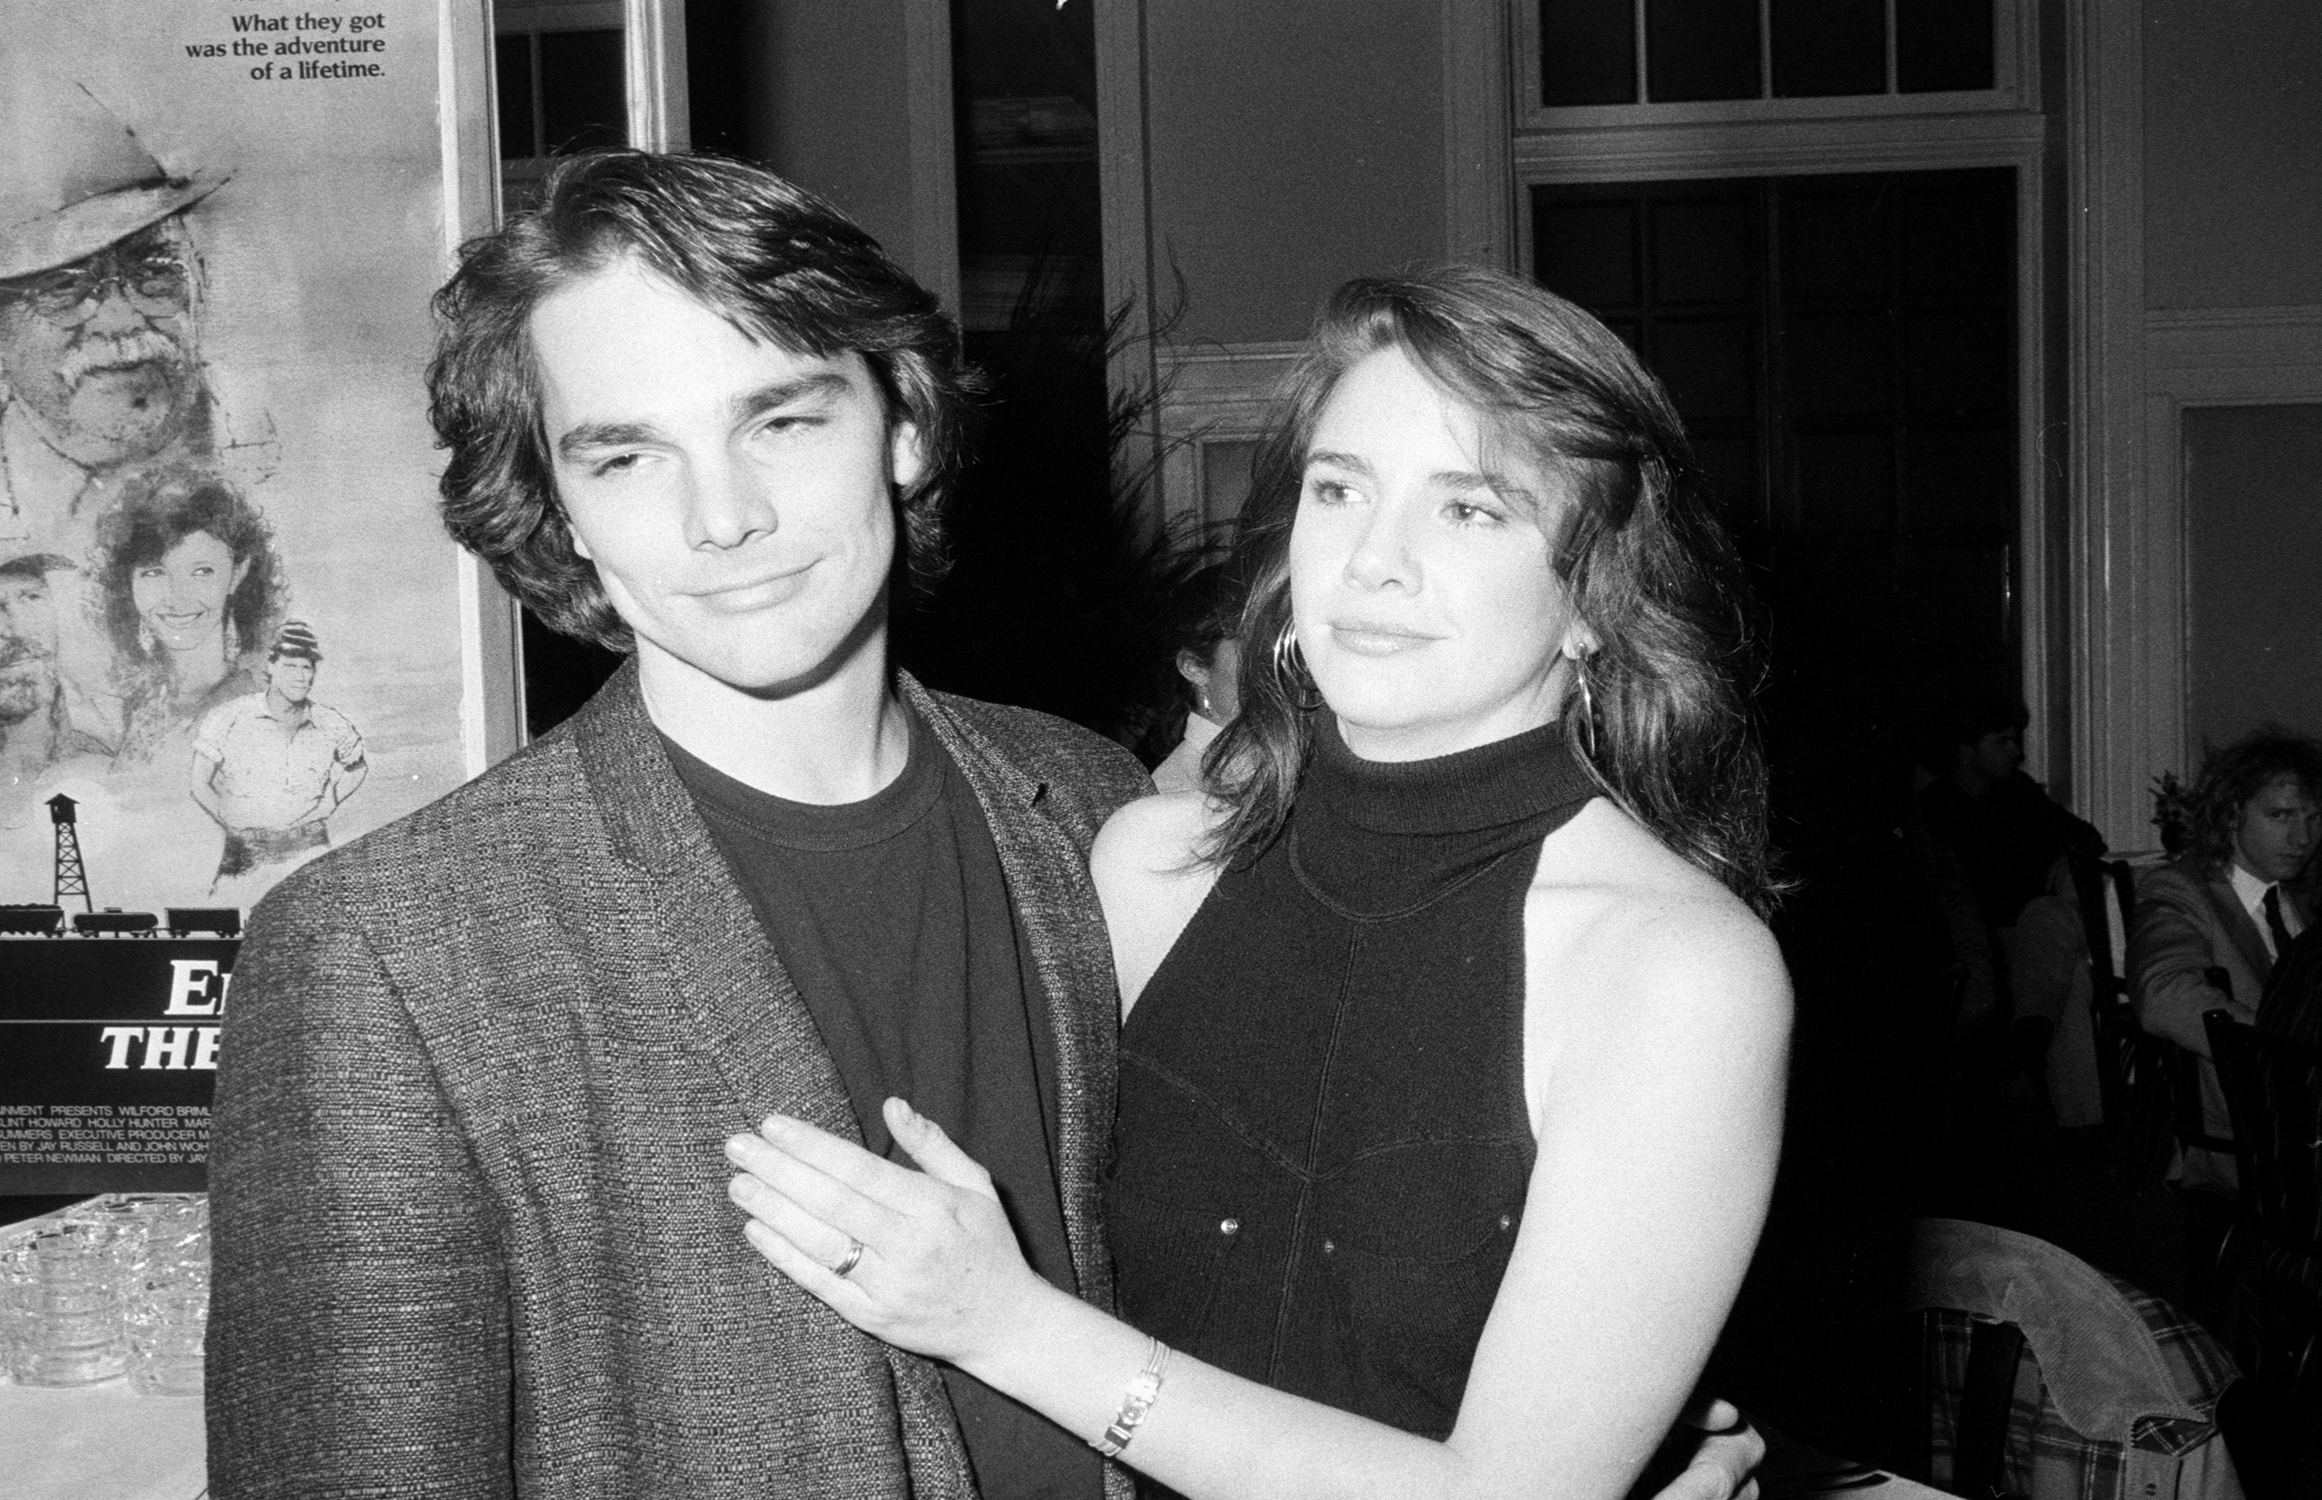 Melissa Gilbert and her first husband, Bo Brinkman, in black and white. His arm is around her and her hand is on his chest.